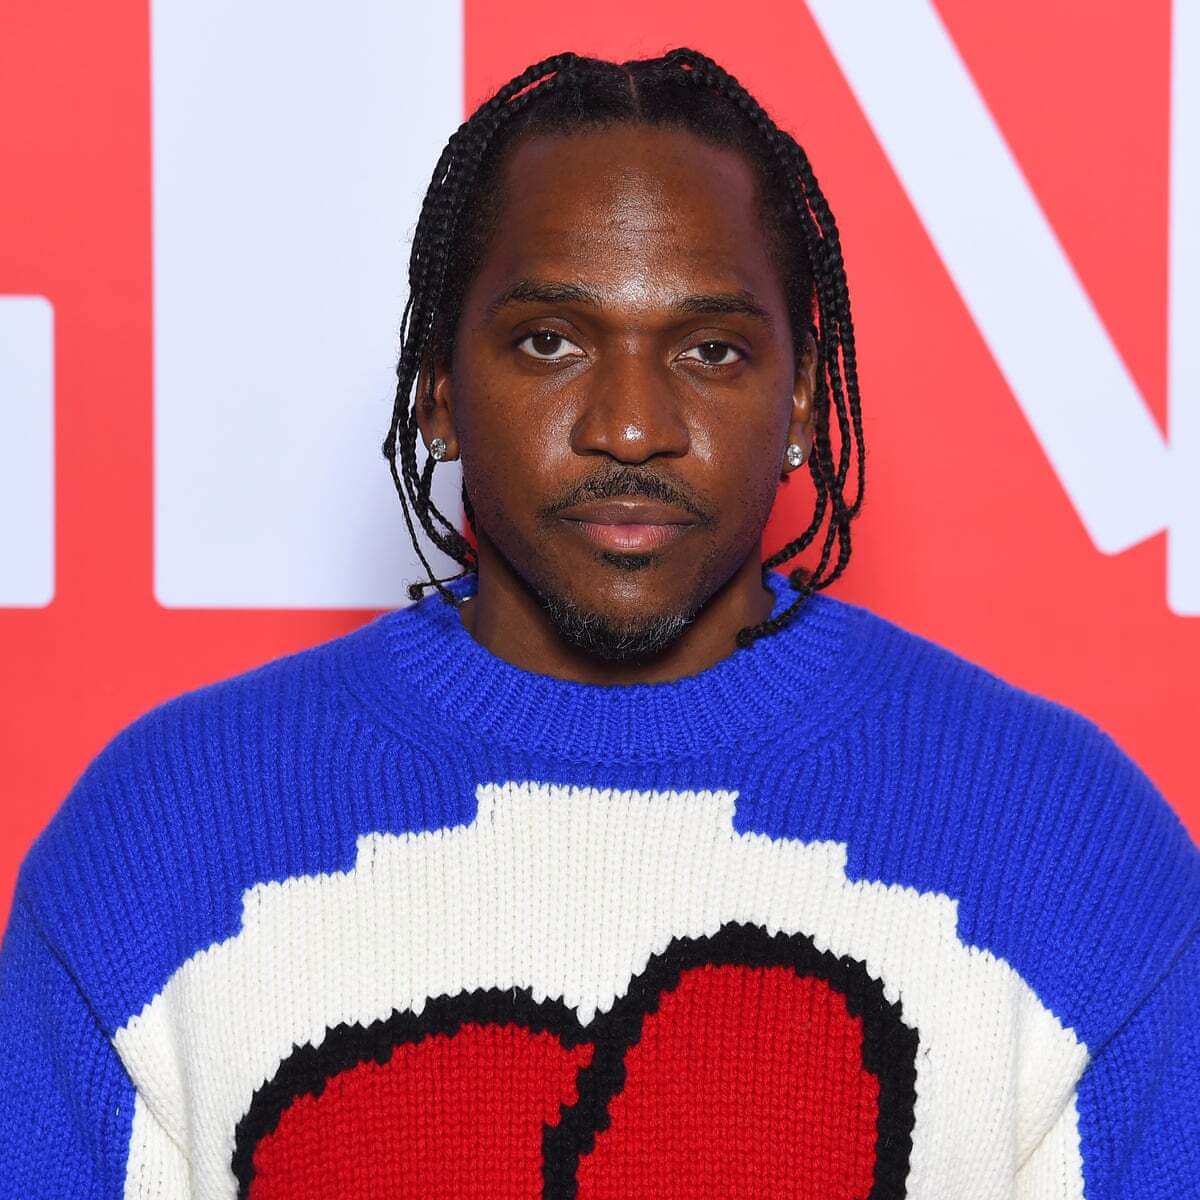 Pusha T Biography: Wife, Net Worth, Songs, Age, Twins, Albums, Children